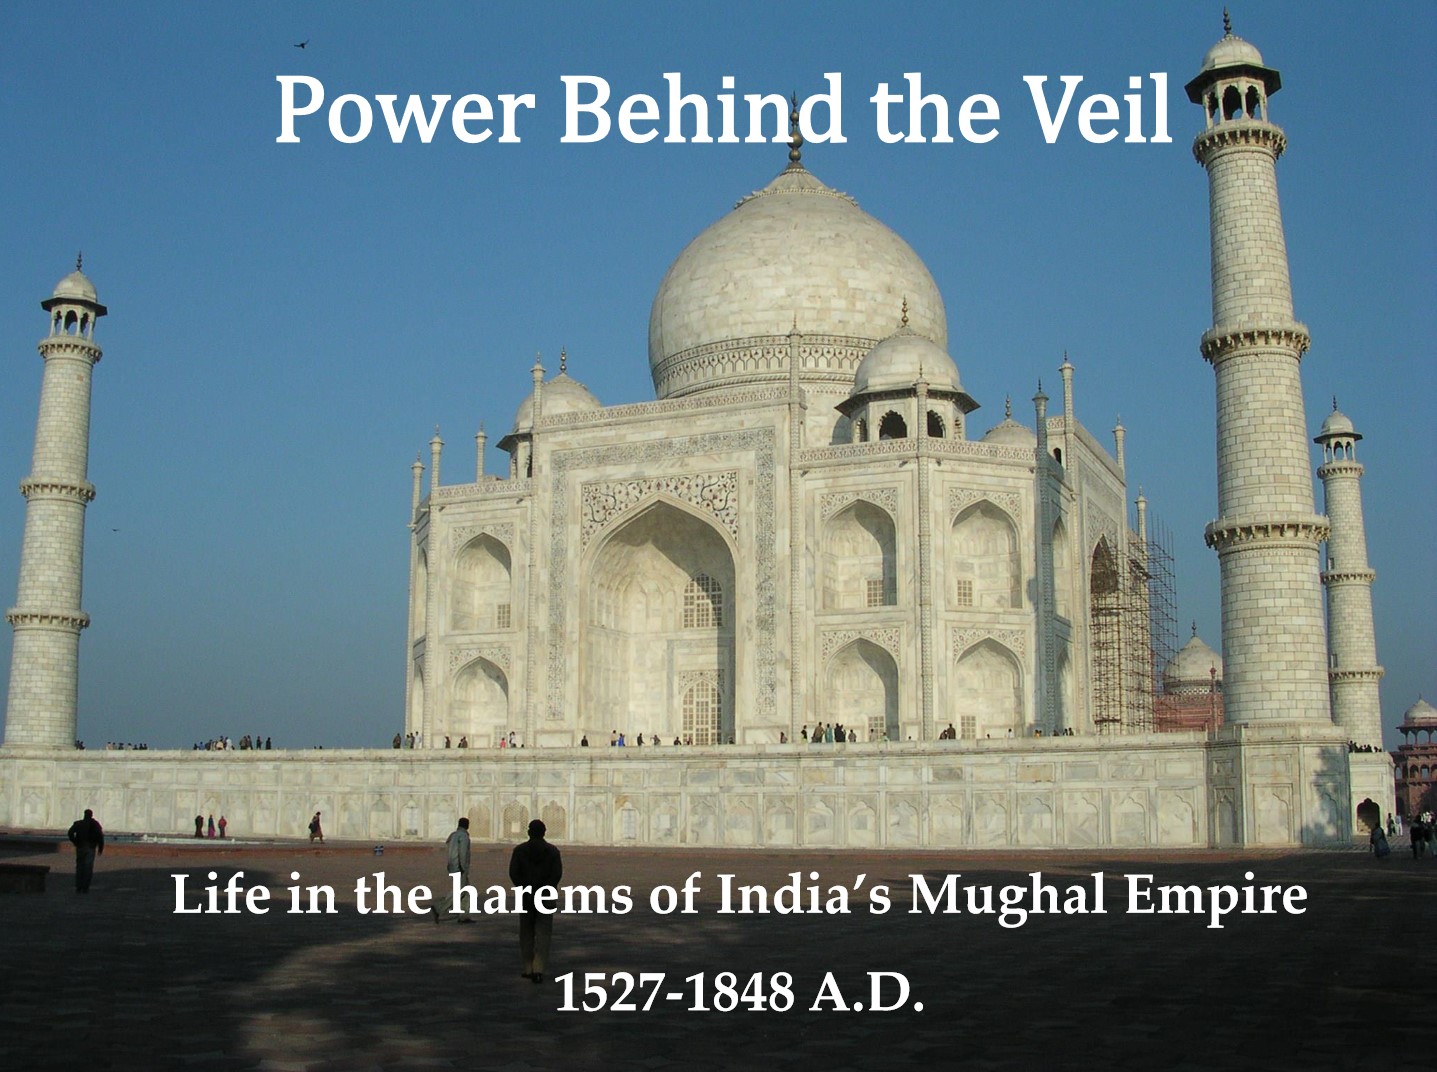 The Taj Mahal image for my talk on Power Behind the Veil, Life in India's Mughal Harems.